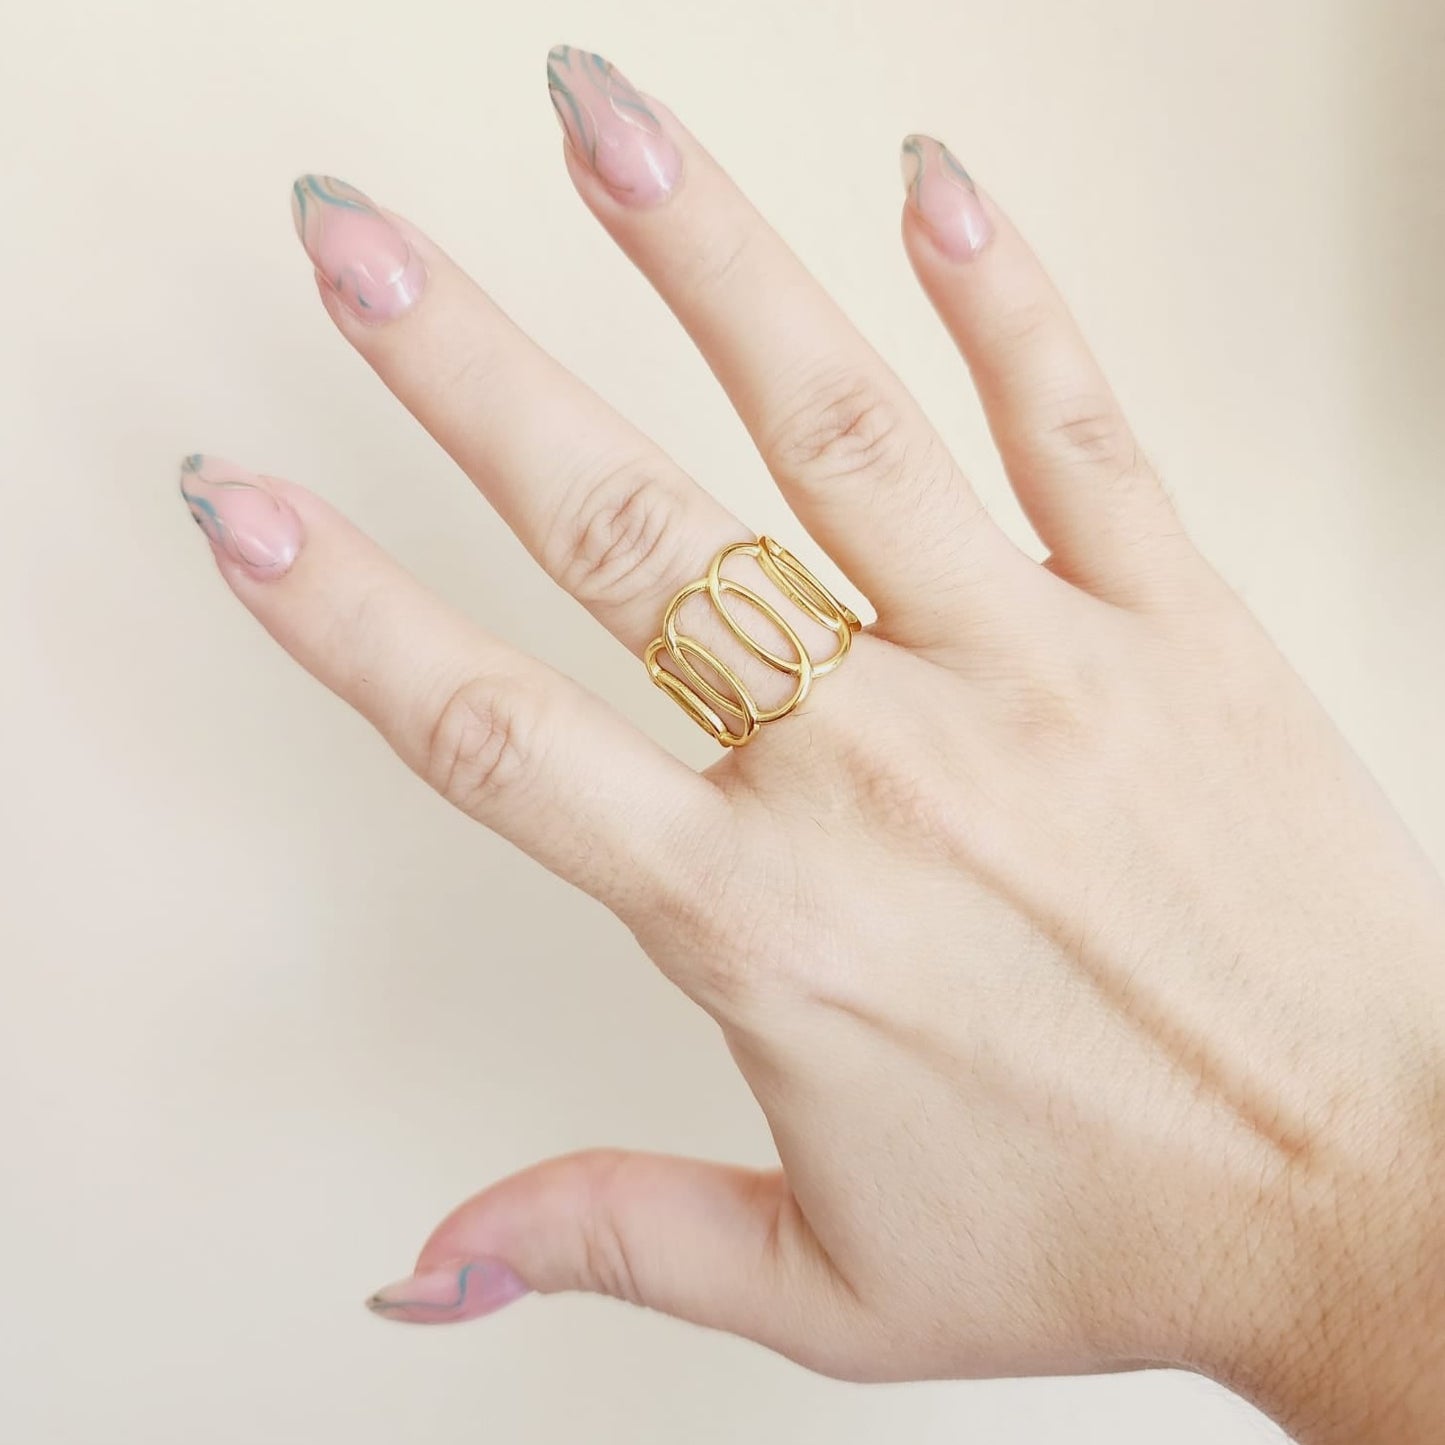 Bold Sun Ring, gold sun Ring, Chunky sun ring, vintage sun bold ring, Adjustable Gold ring, Adjustable Gold ring, dainty leaves ring, Delicate and simple ring, chunky star ring, green gold ring, waterproof ring, hypoallergenic ring, untarnish ring, anti tarnish ring, anillo de estrellas, Water Resistant